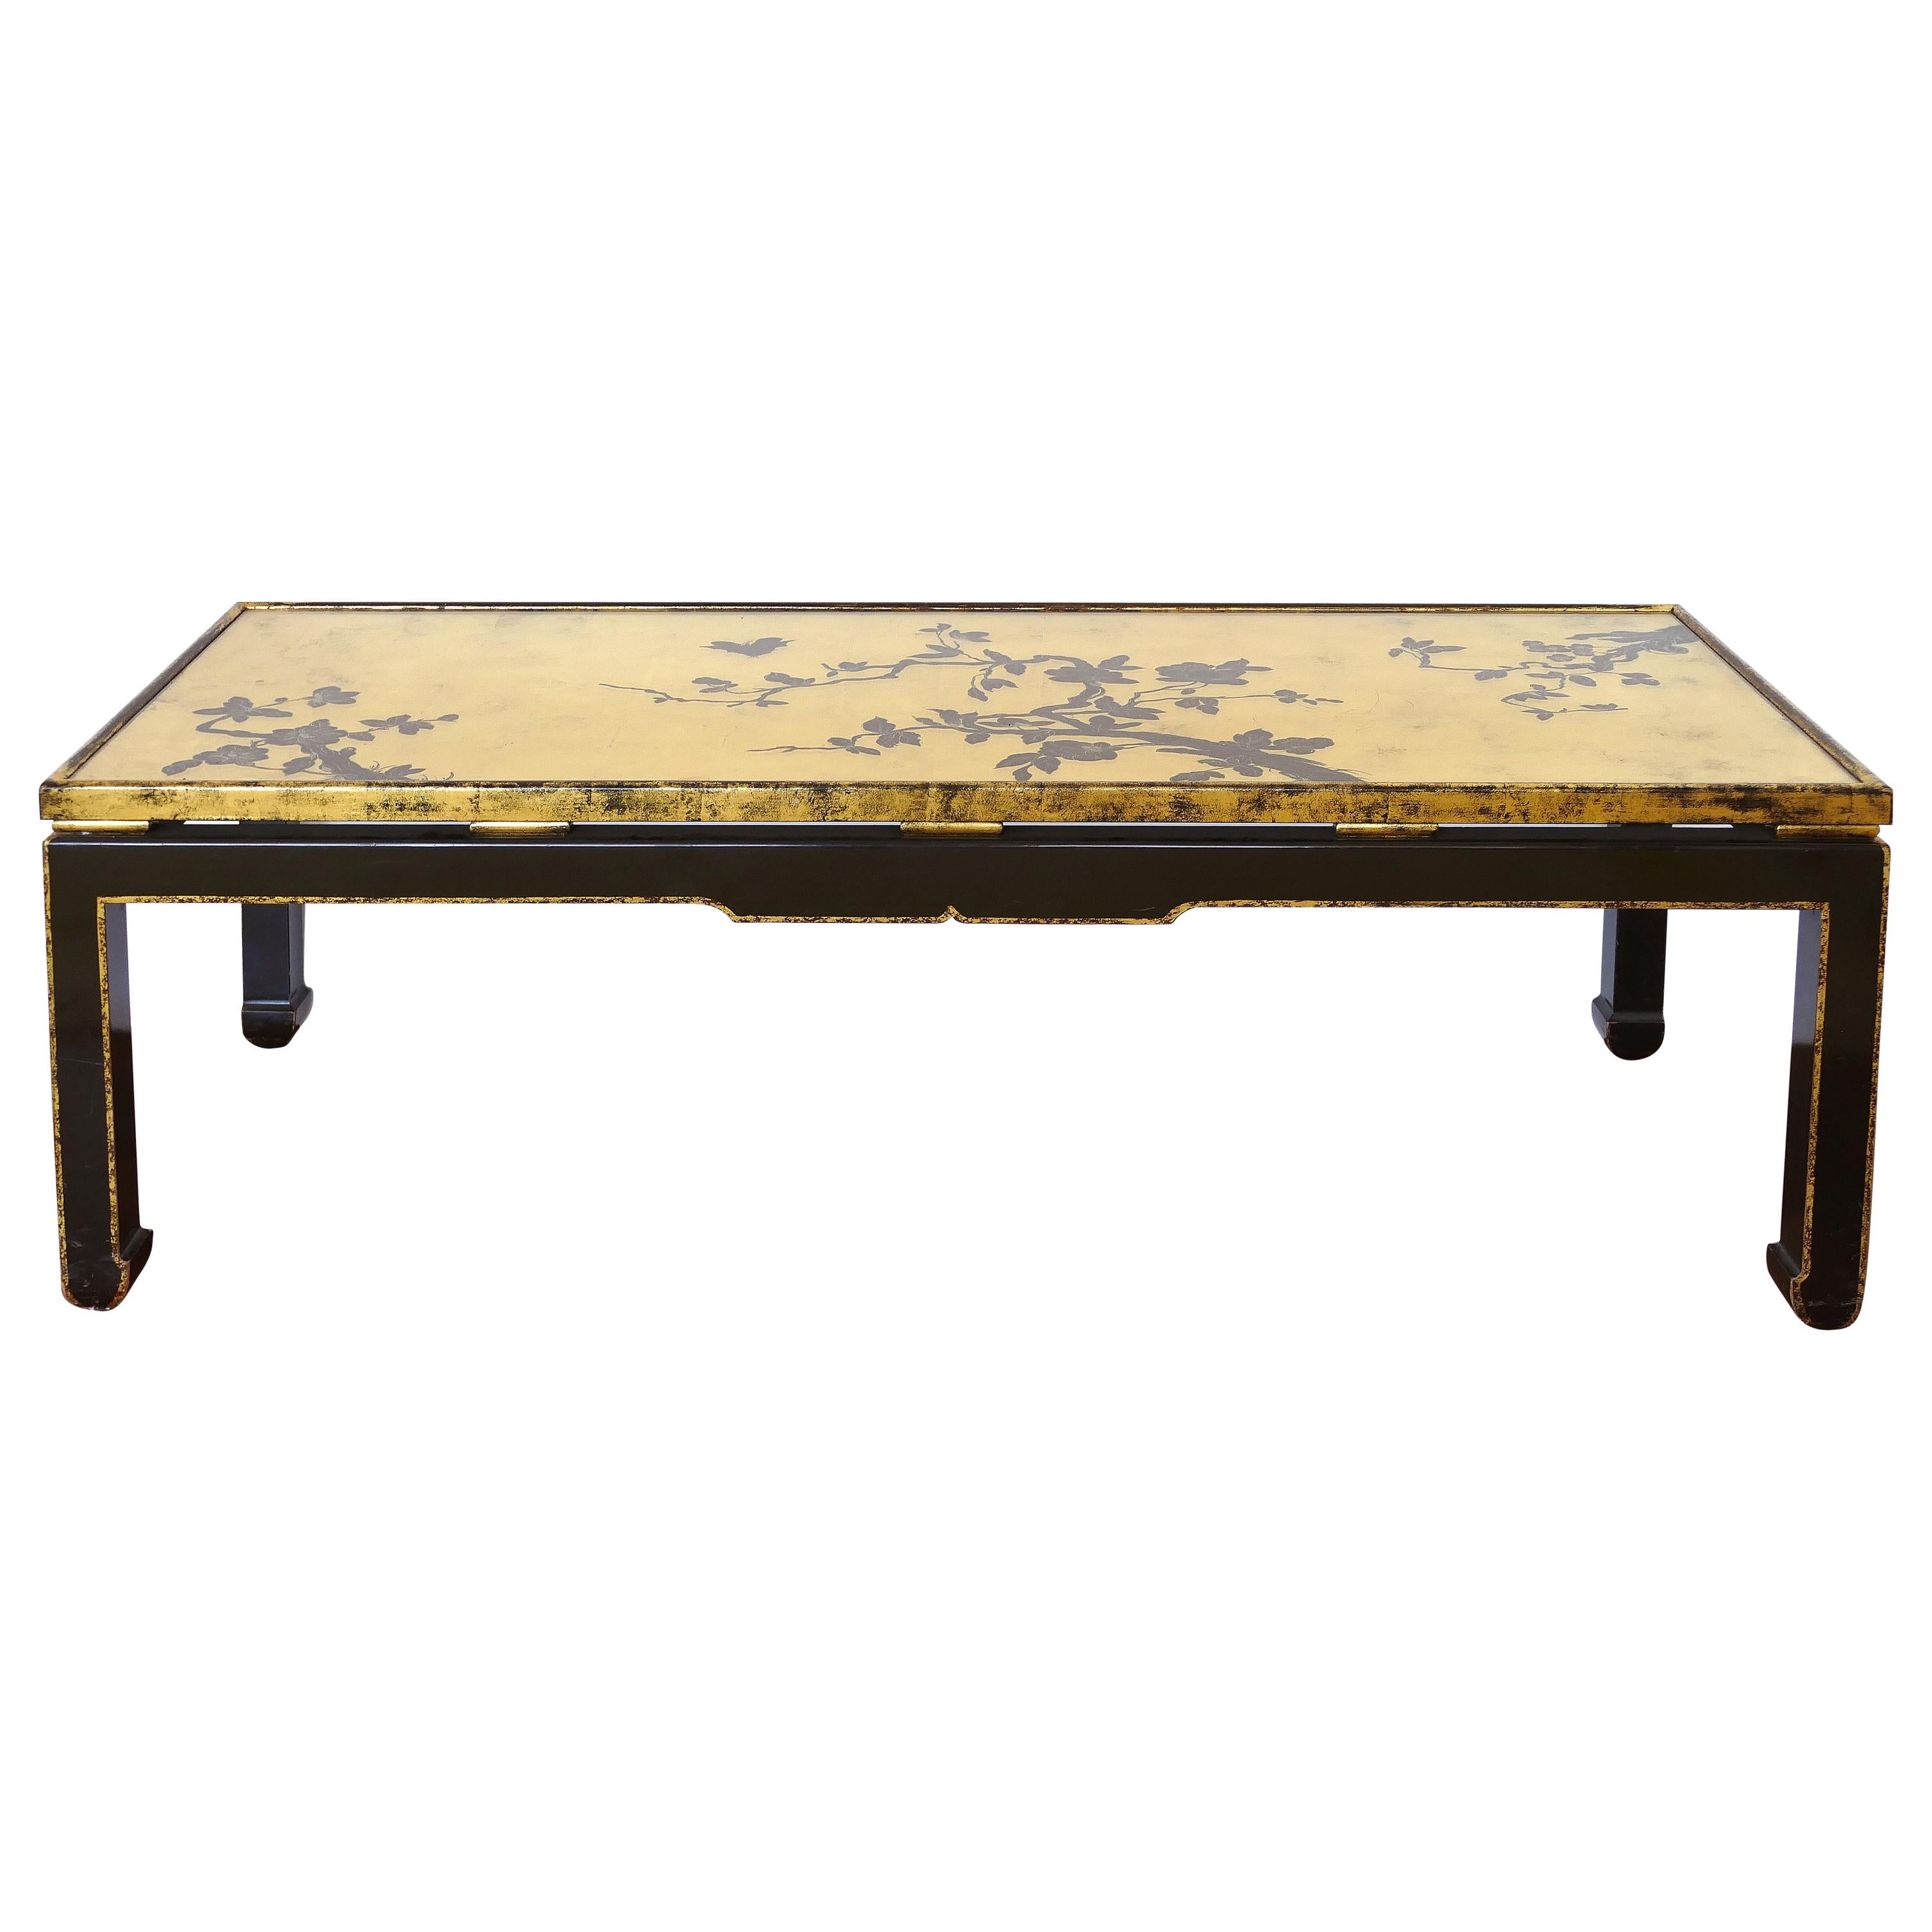 Mid-century Japanese Gold Leaf Cherry Blossom Coffee Table with Inset Glass For Sale